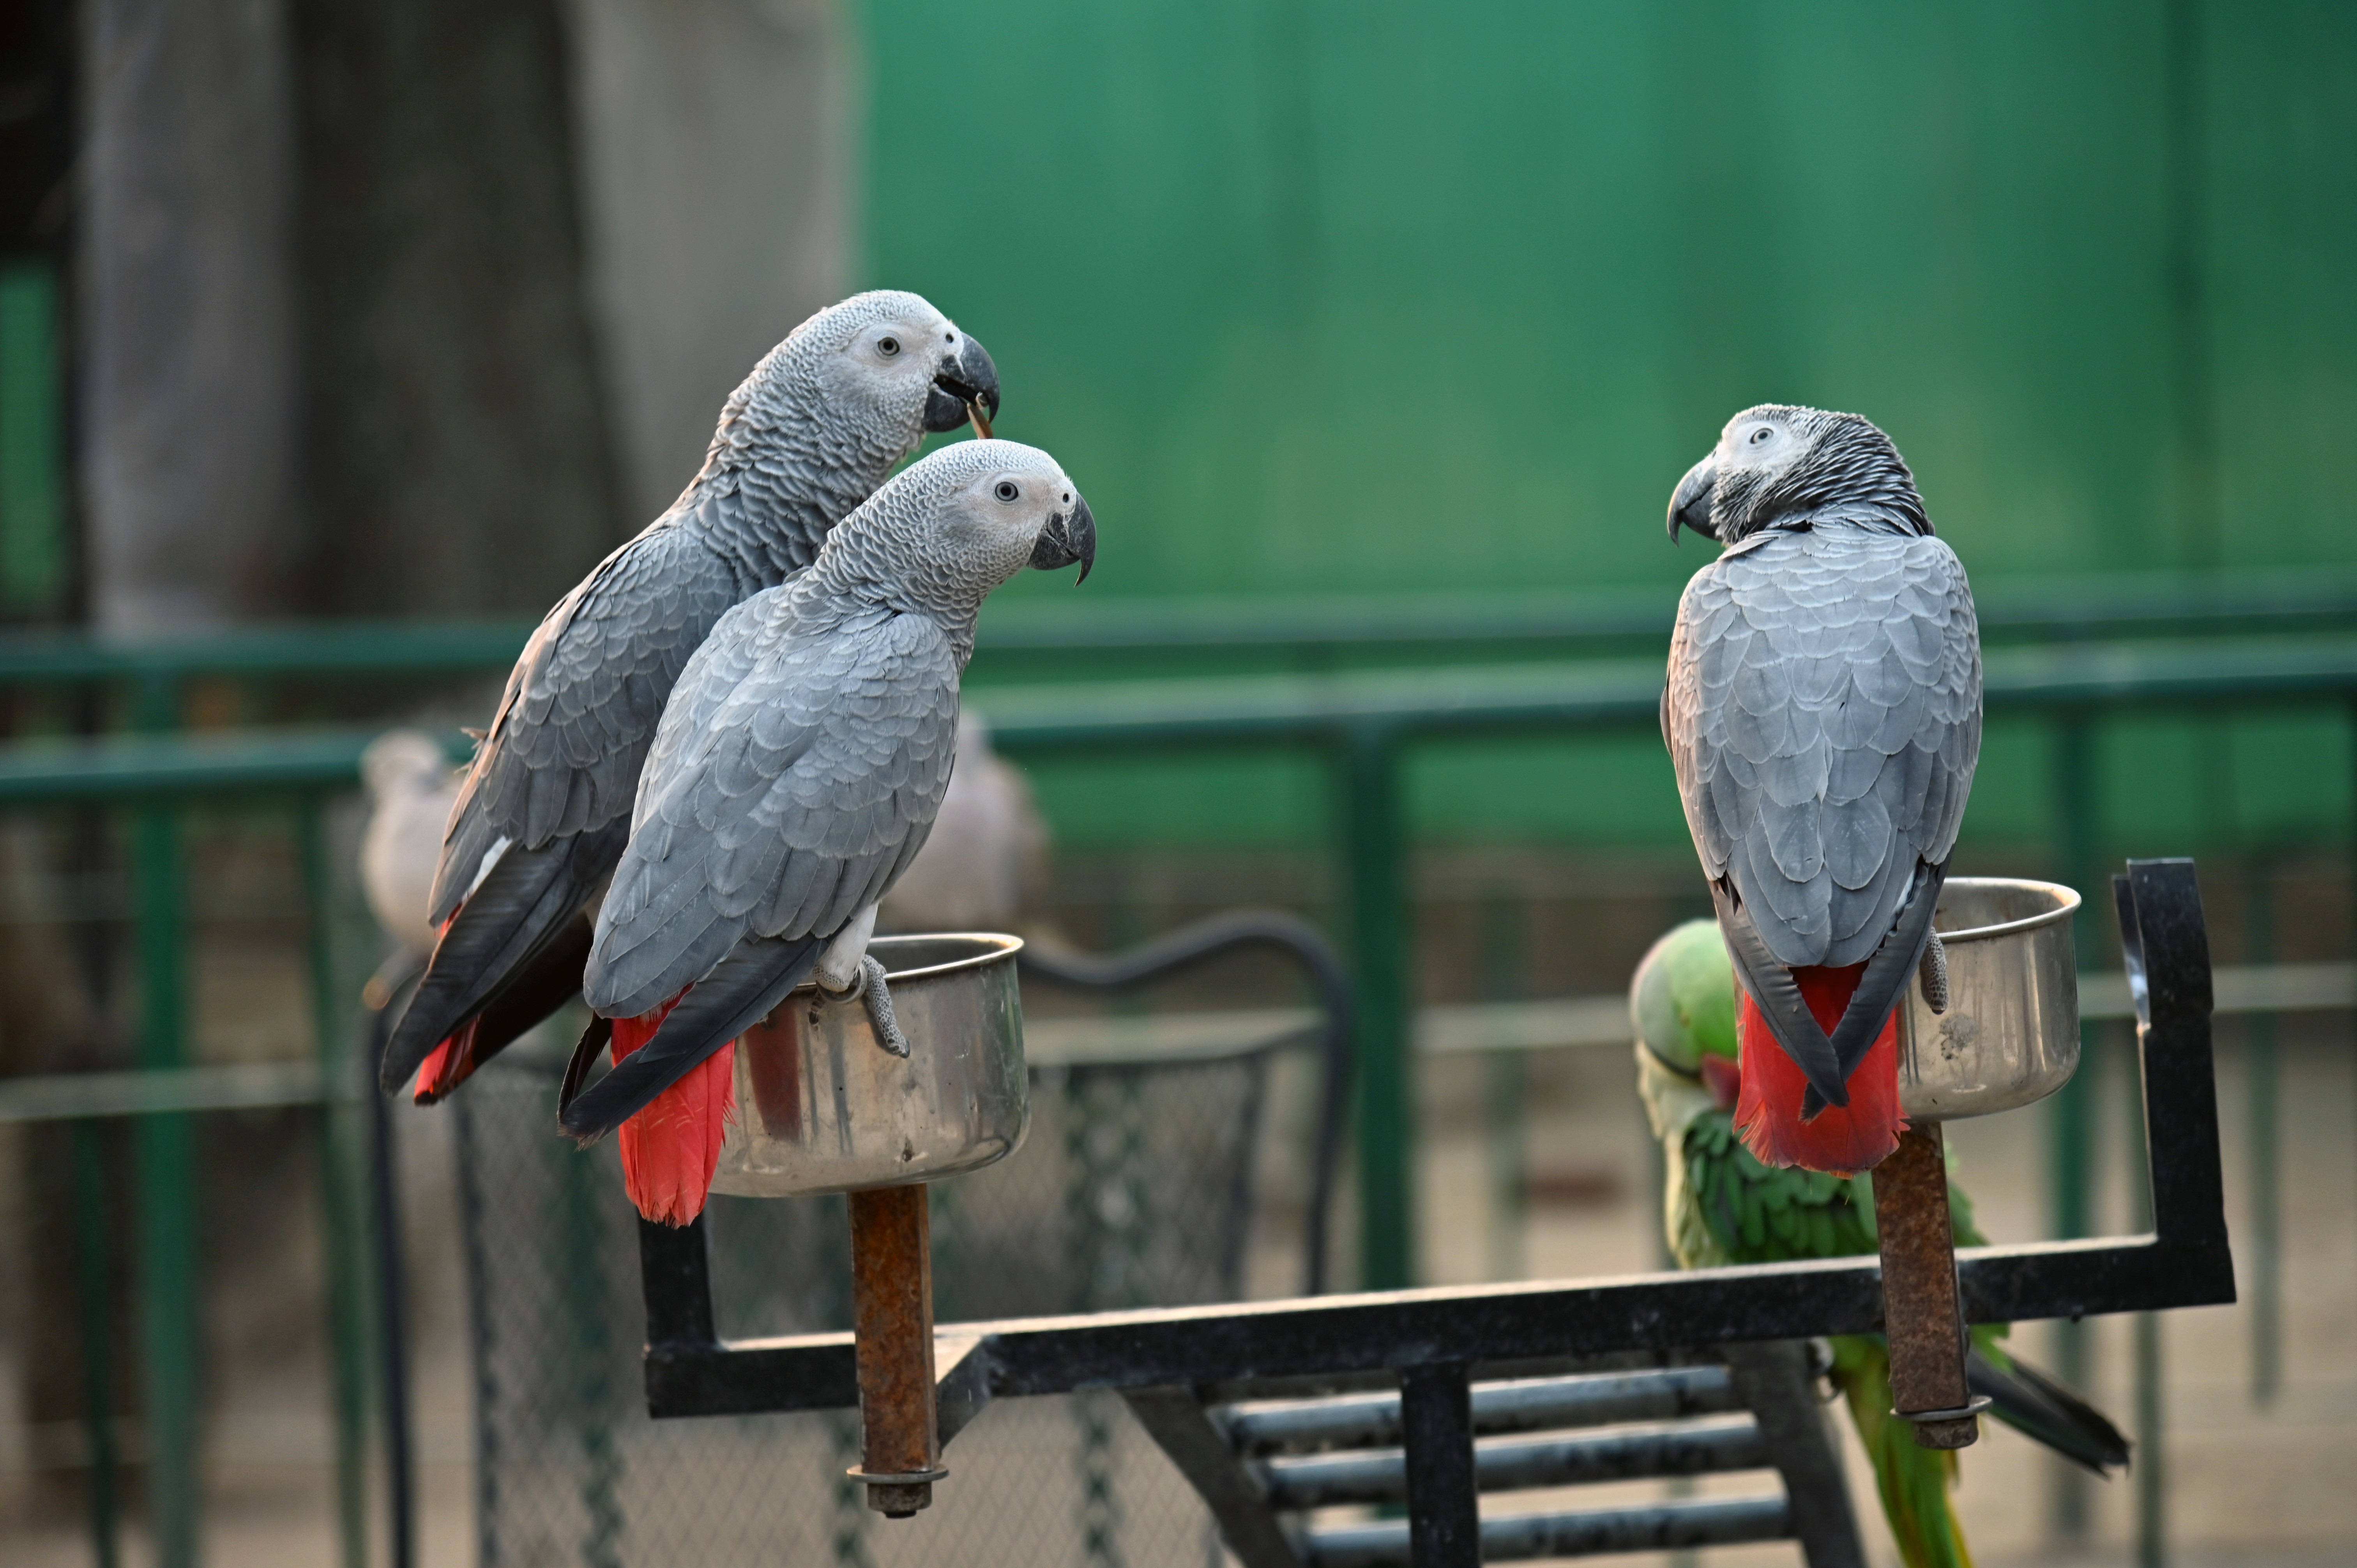 The African Grey Parrots